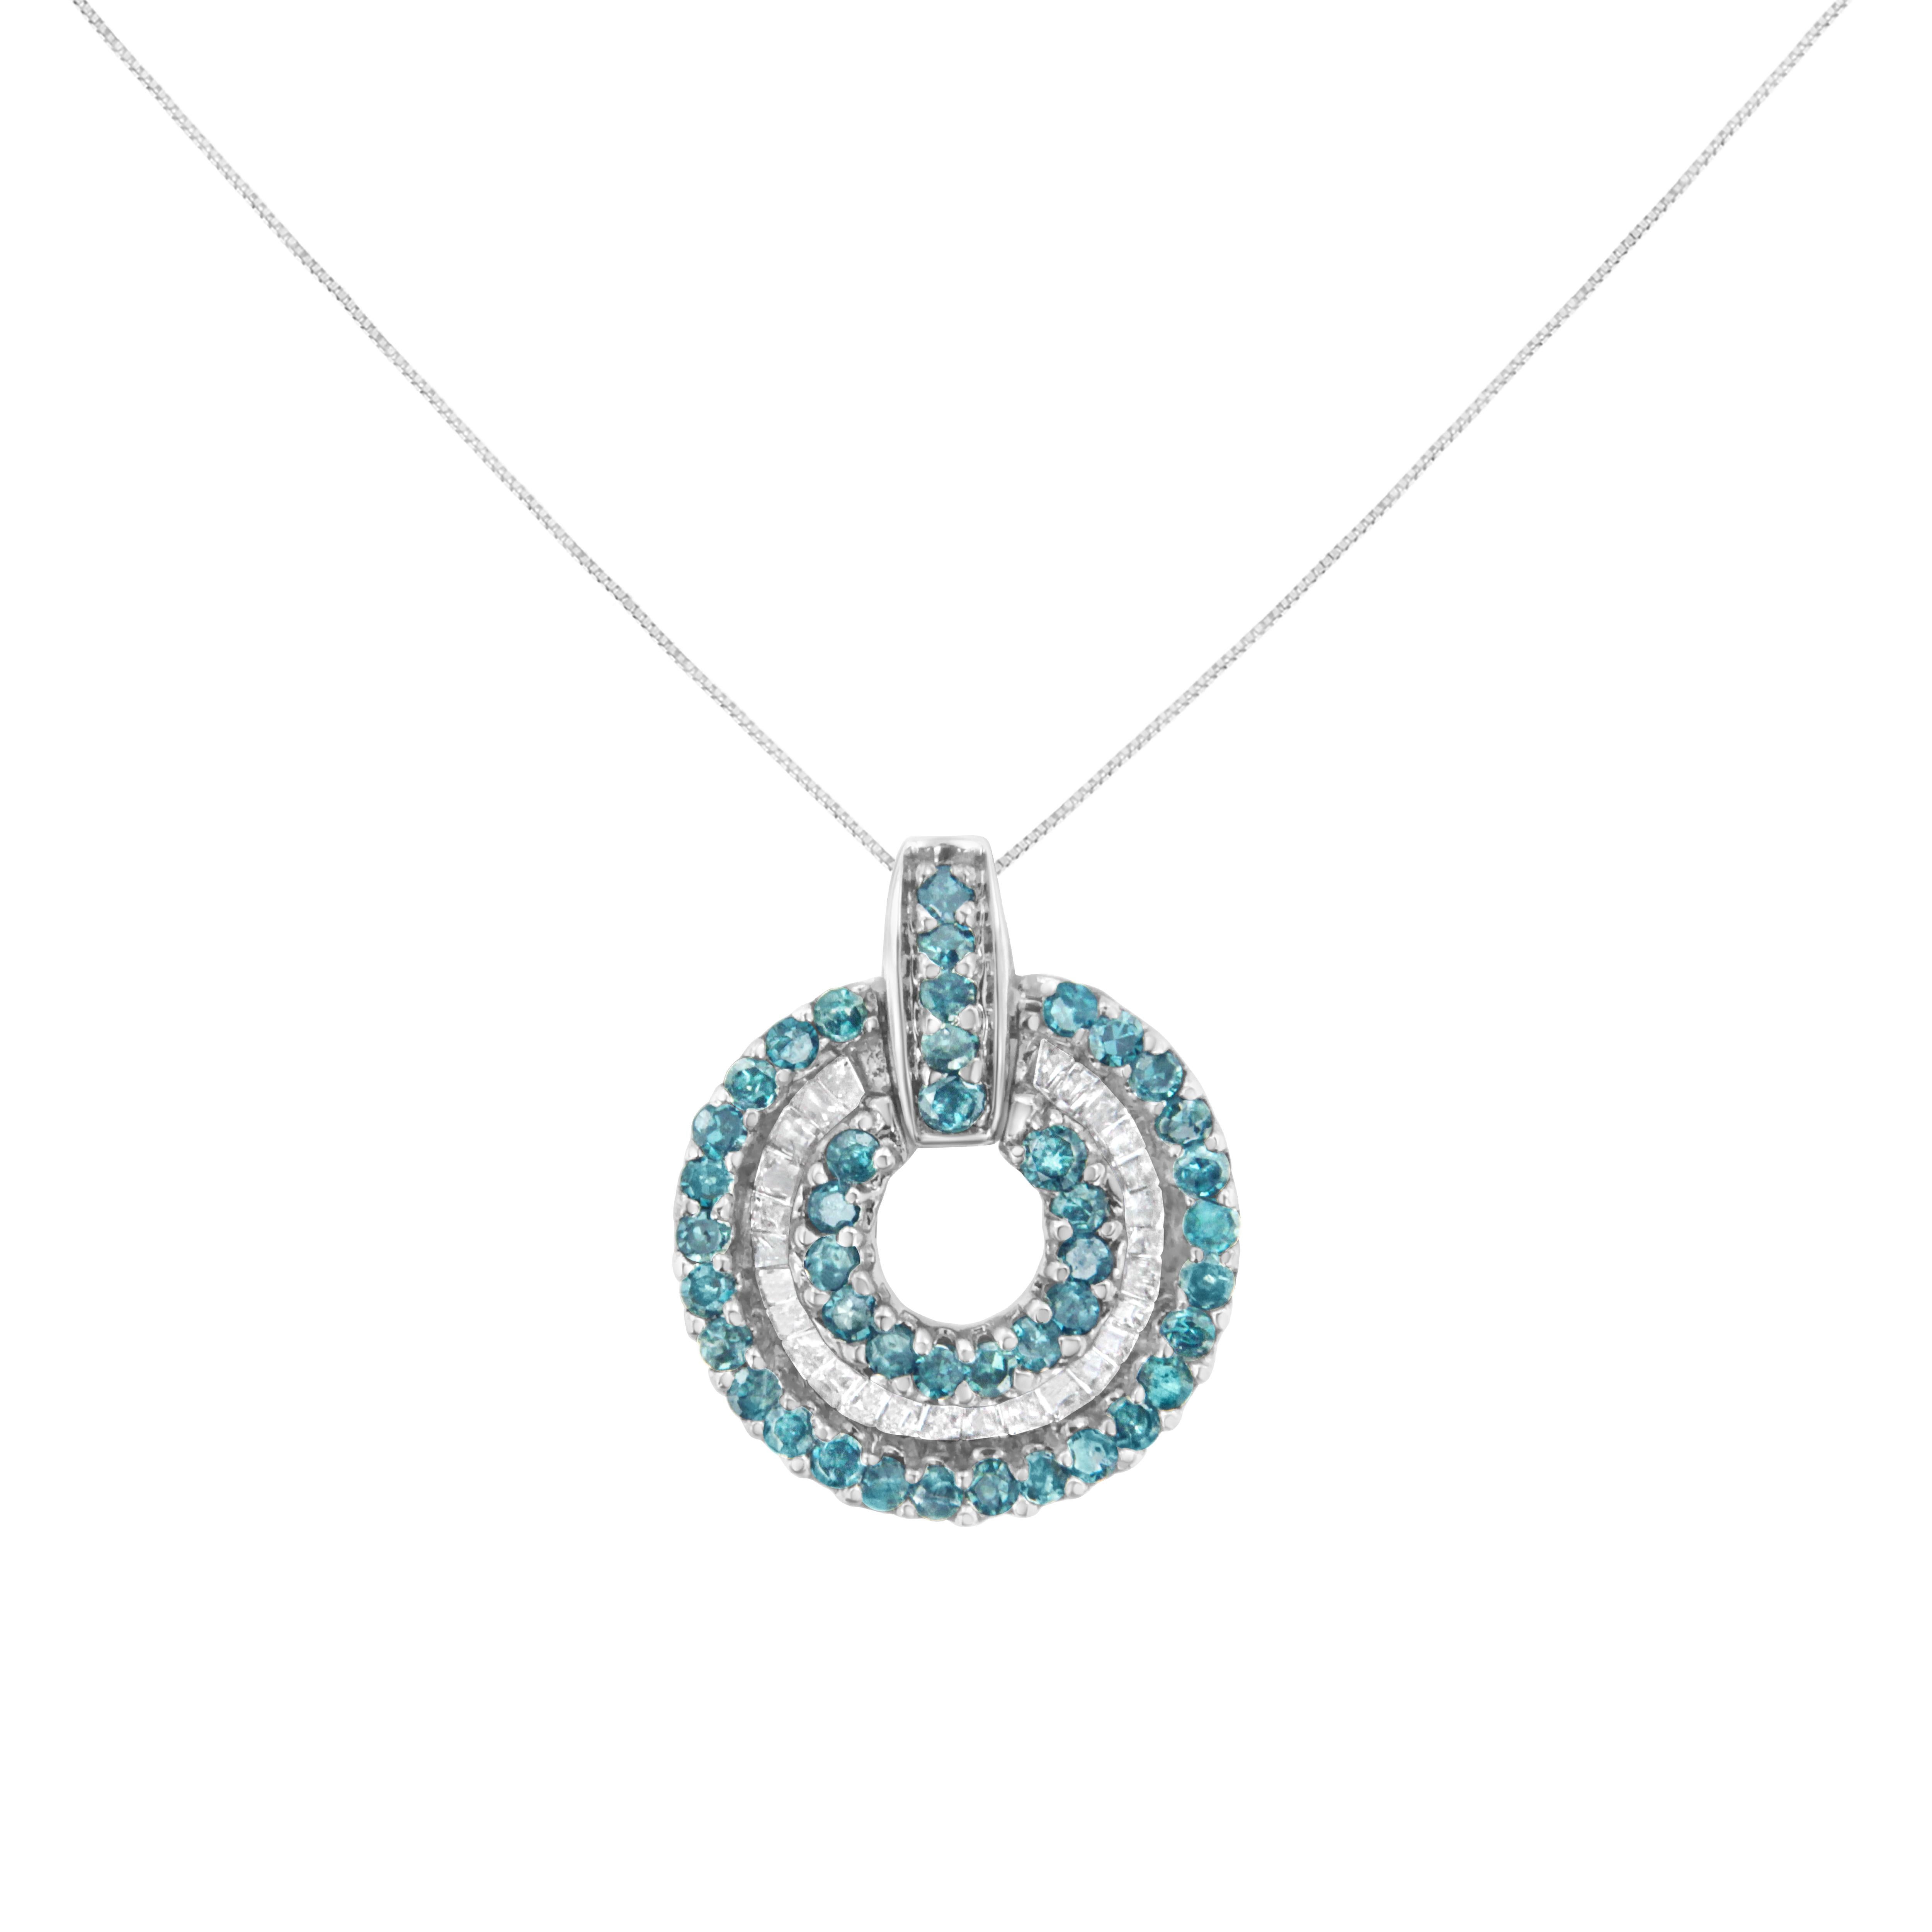 This stunning 14k white gold pendant necklace features a stunning circular design. The pendant boasts an outer circle of sparkling round-cut, treated blue diamonds, followed by channel-set, baguette-cut natural diamonds, and then another circle of